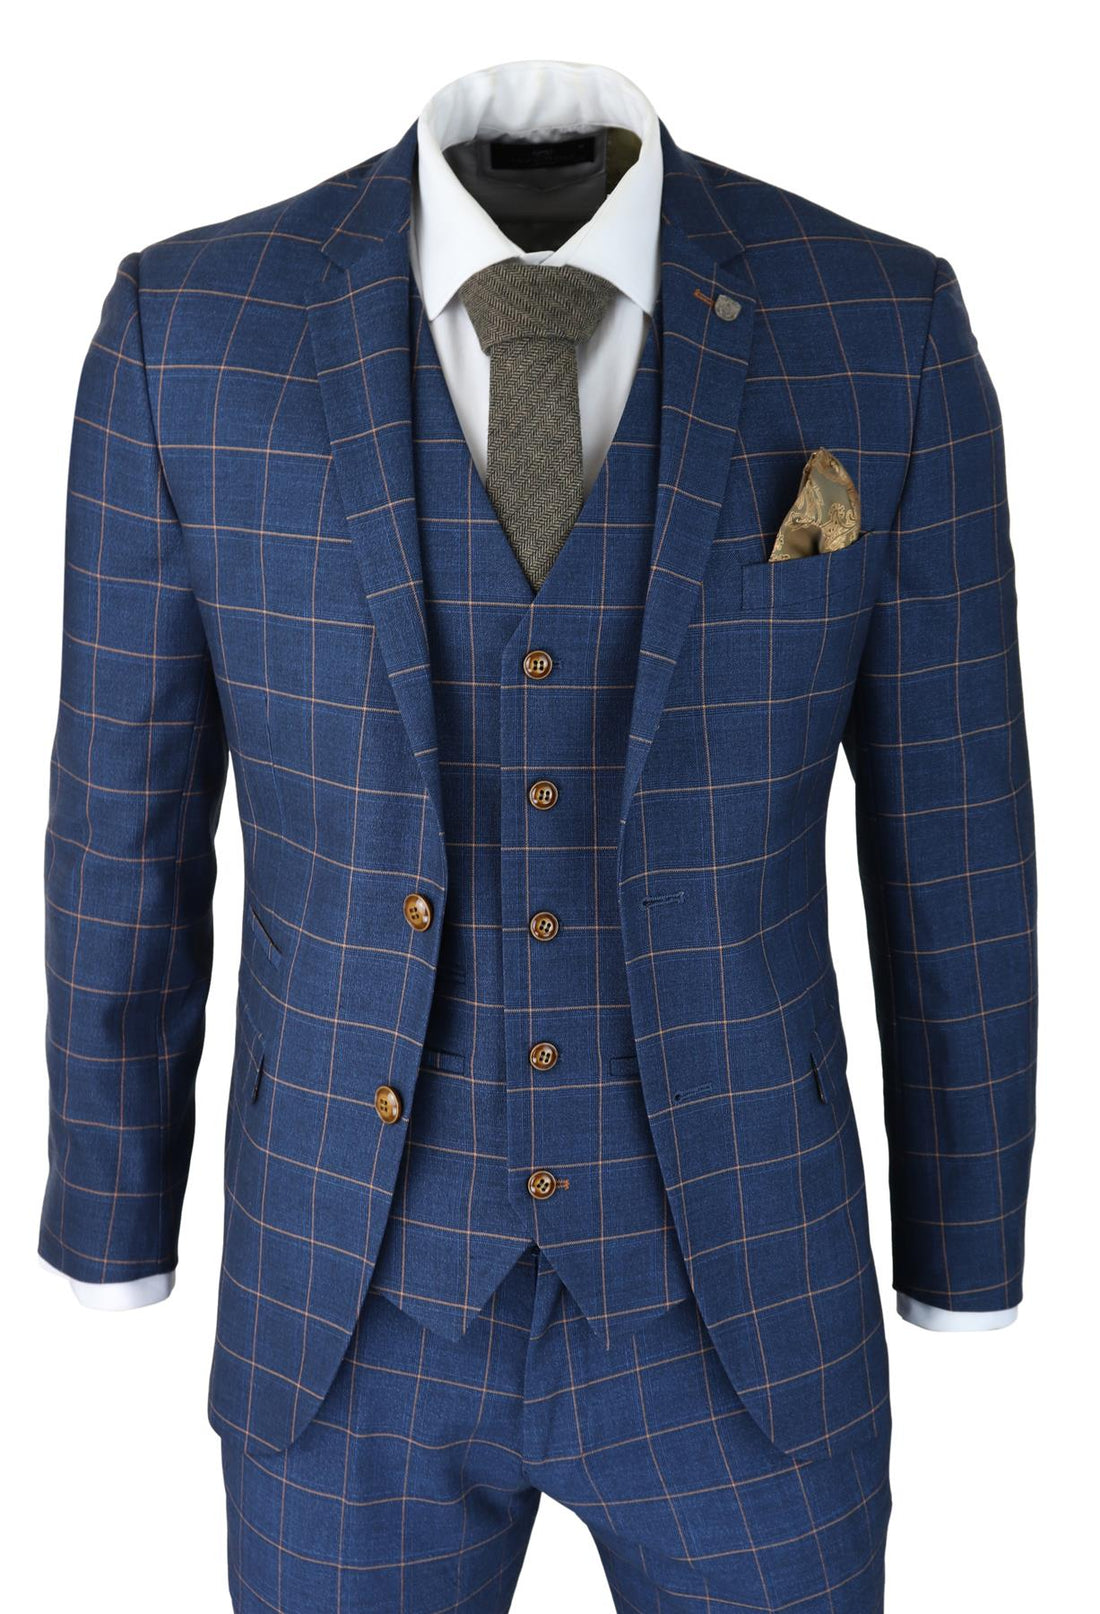 Mens 3 Piece Suit Blue Gold Check Peaky Blinders 1920 Gatsby Smart Vintage Suit - Upperclass Fashions 